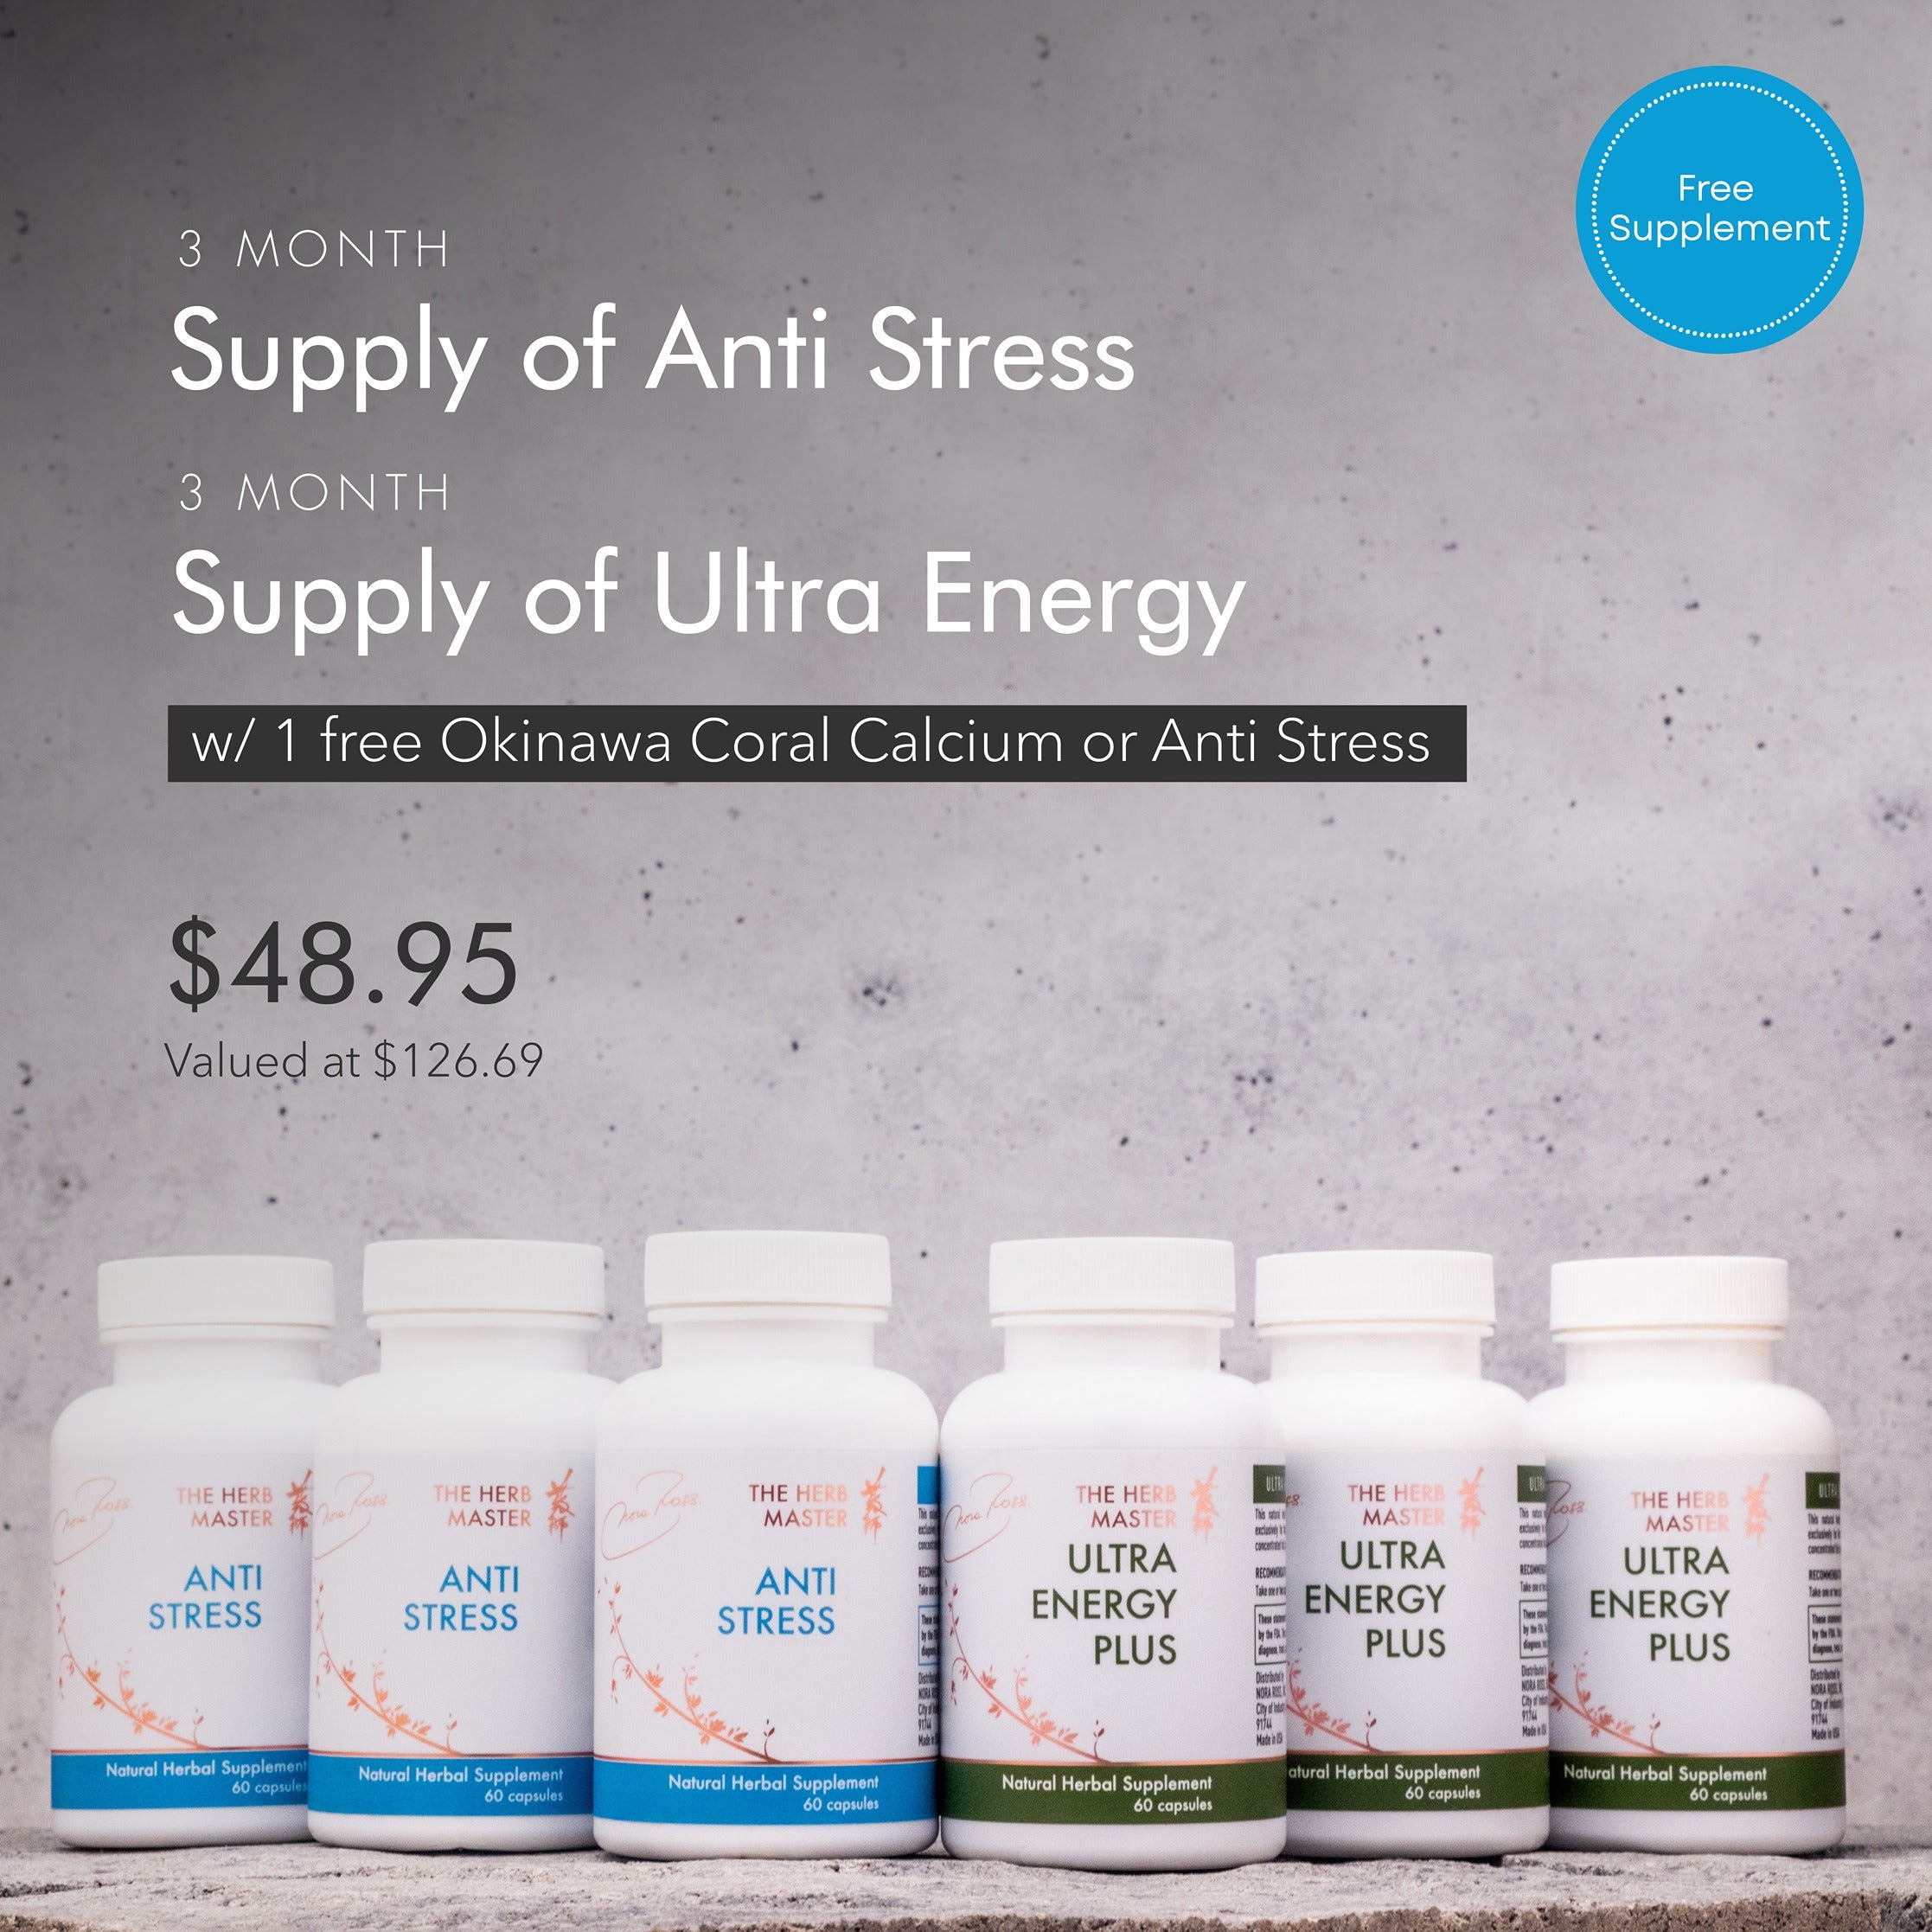 3 Month Supply of Anti Stress & Ultra Energy Duo + 1 Free Supplement